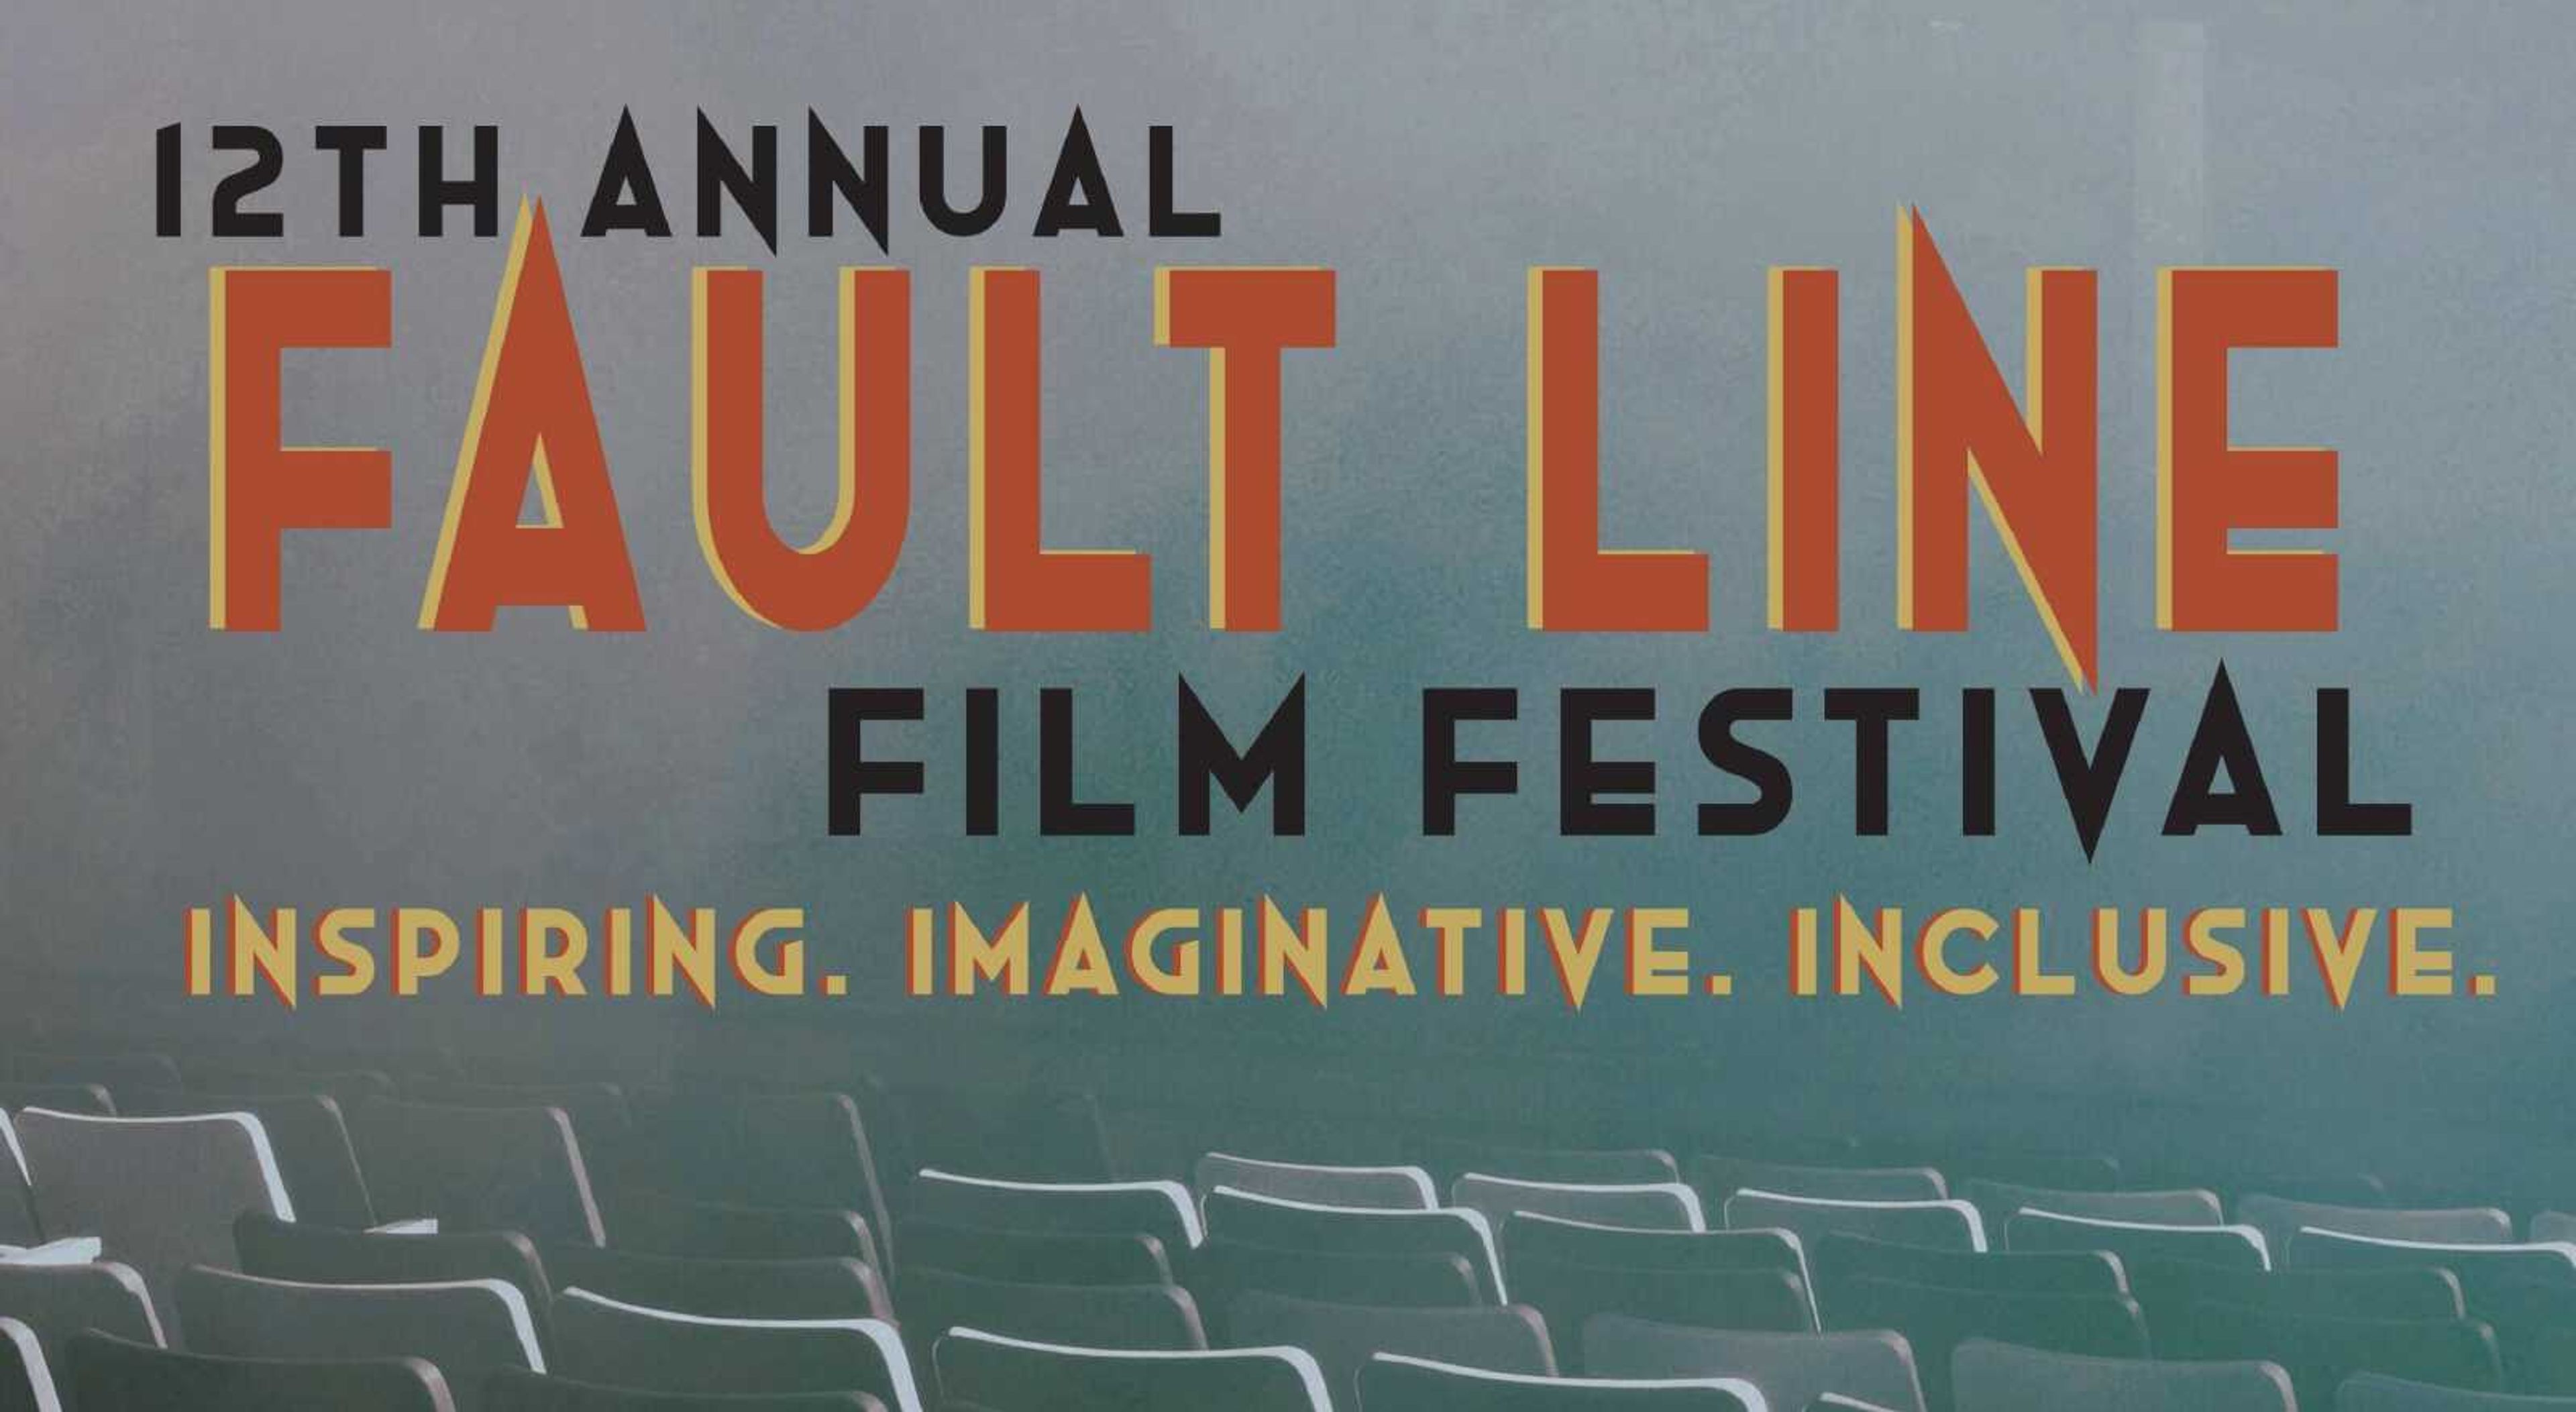 Lights, Camera and the Fault Line Film Festival